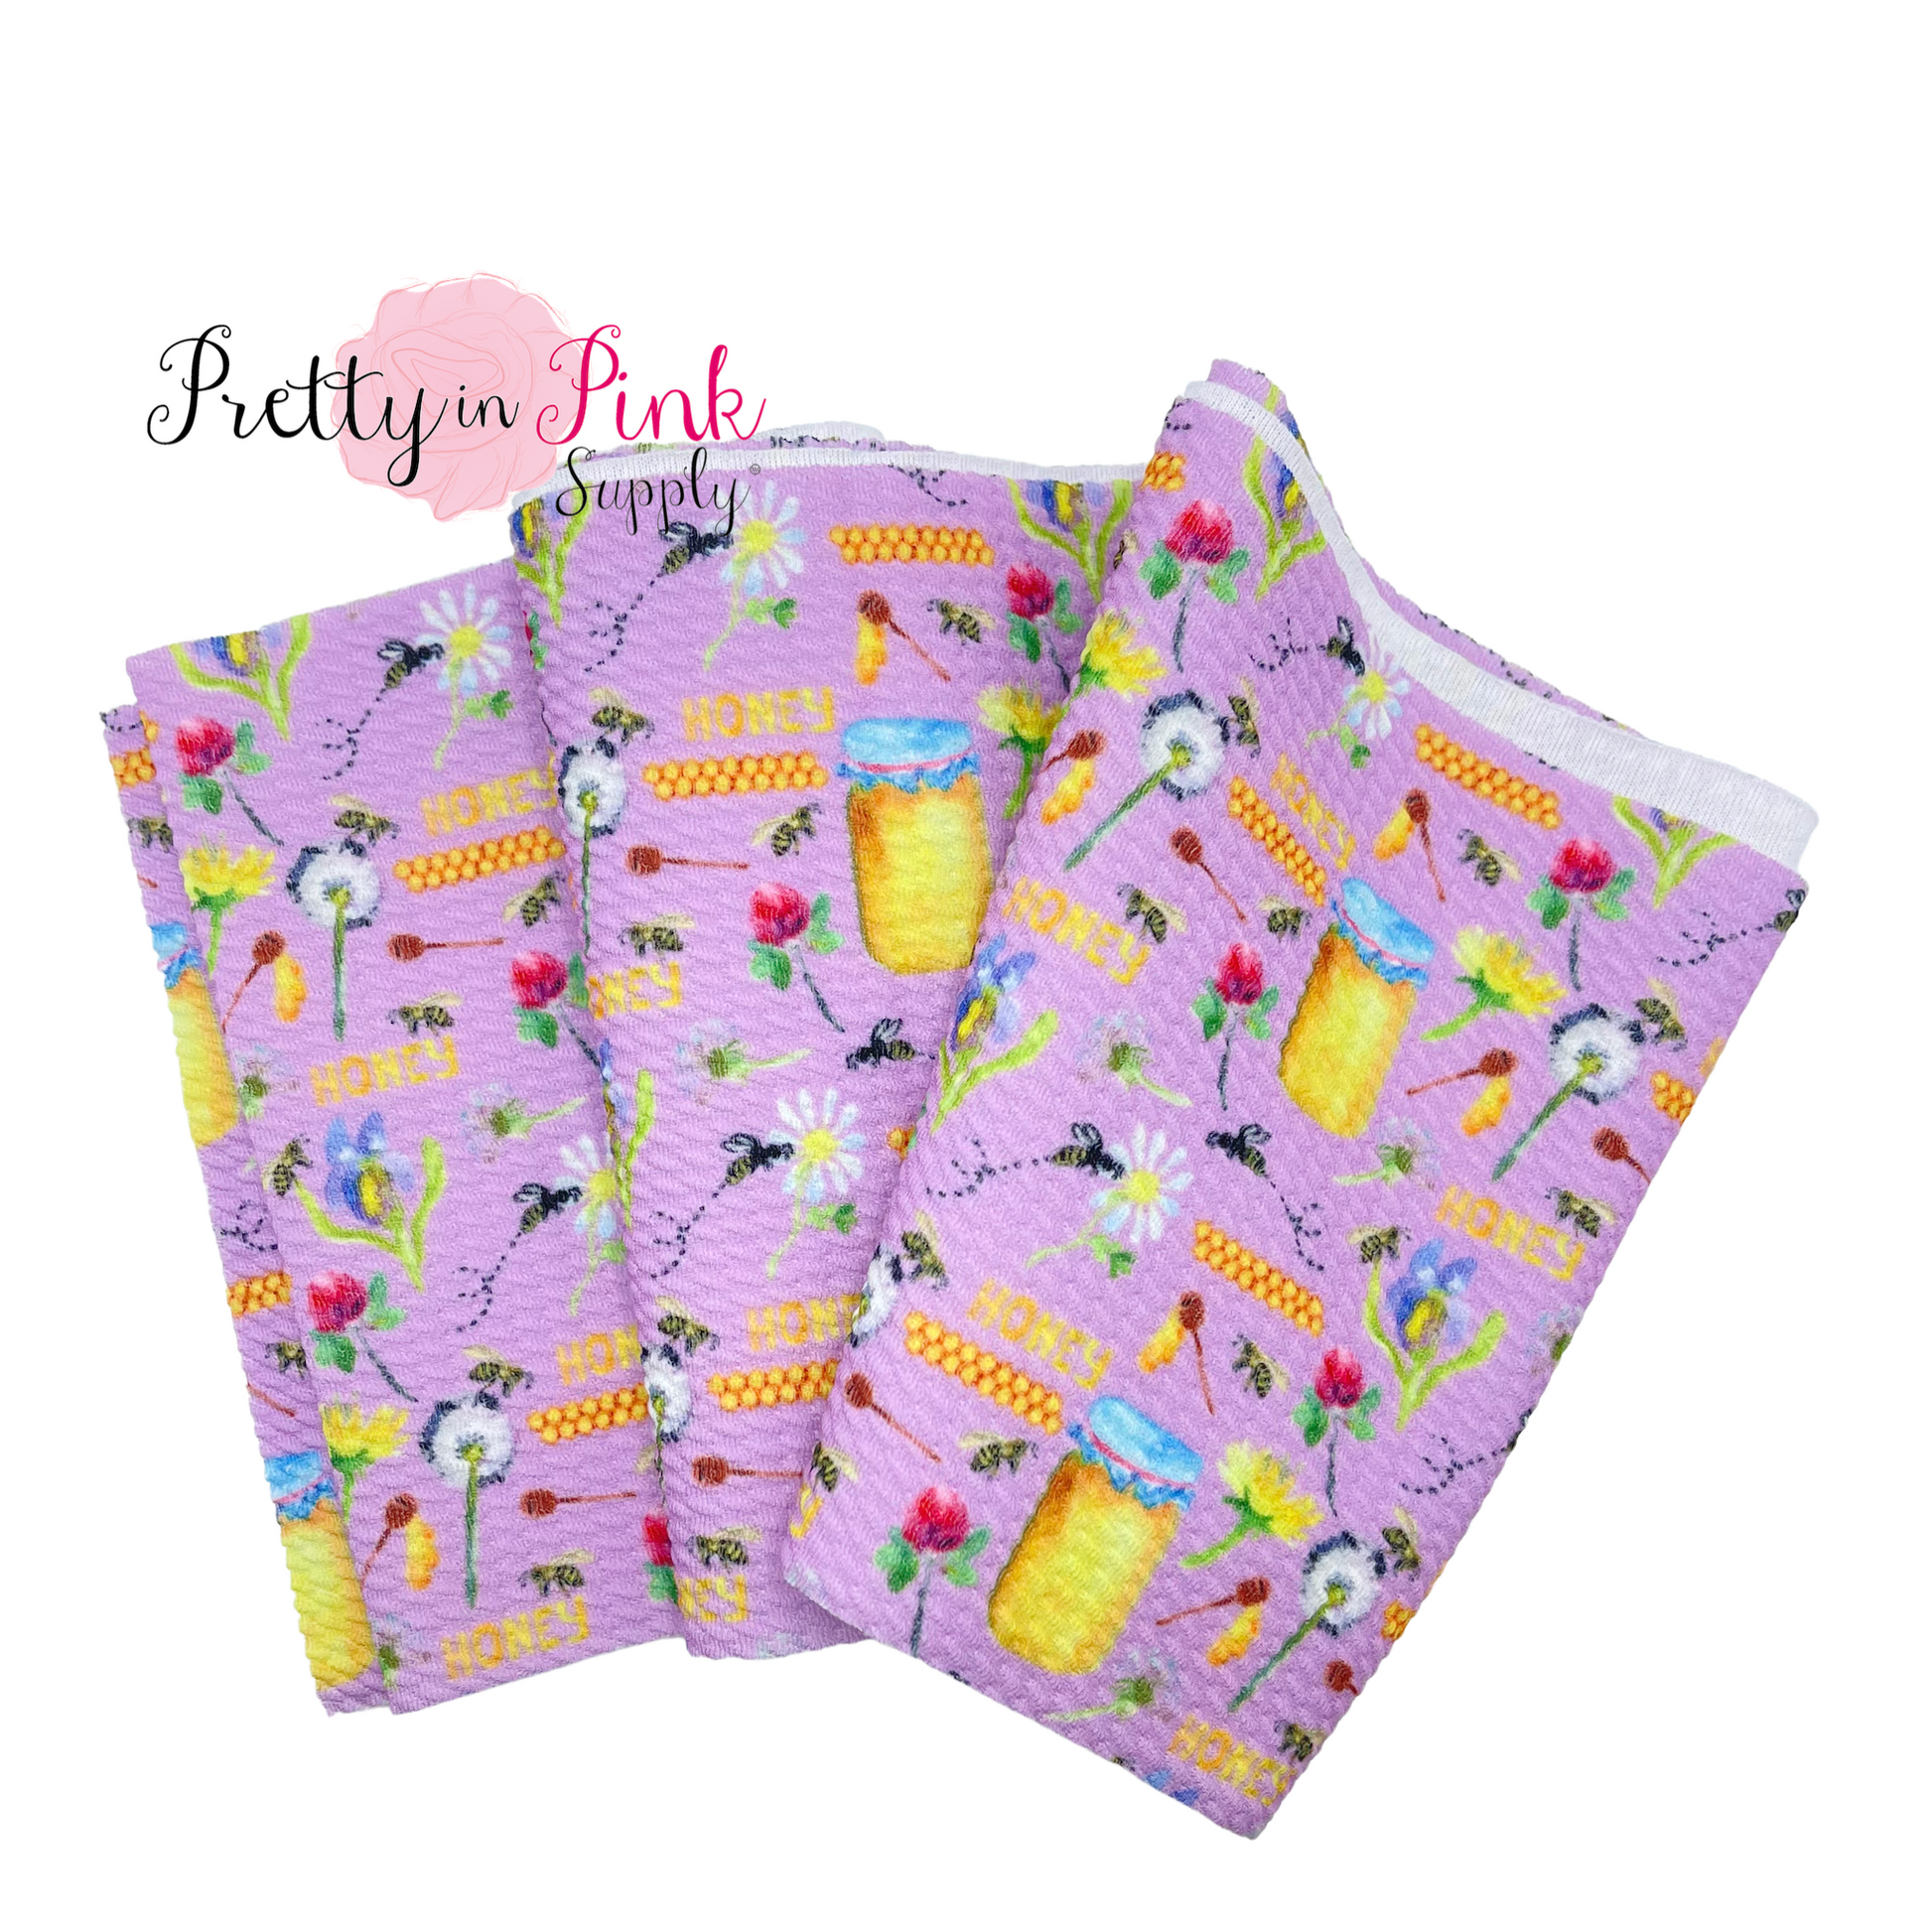 Oh, Honey | Liverpool Fabric - Pretty in Pink Supply